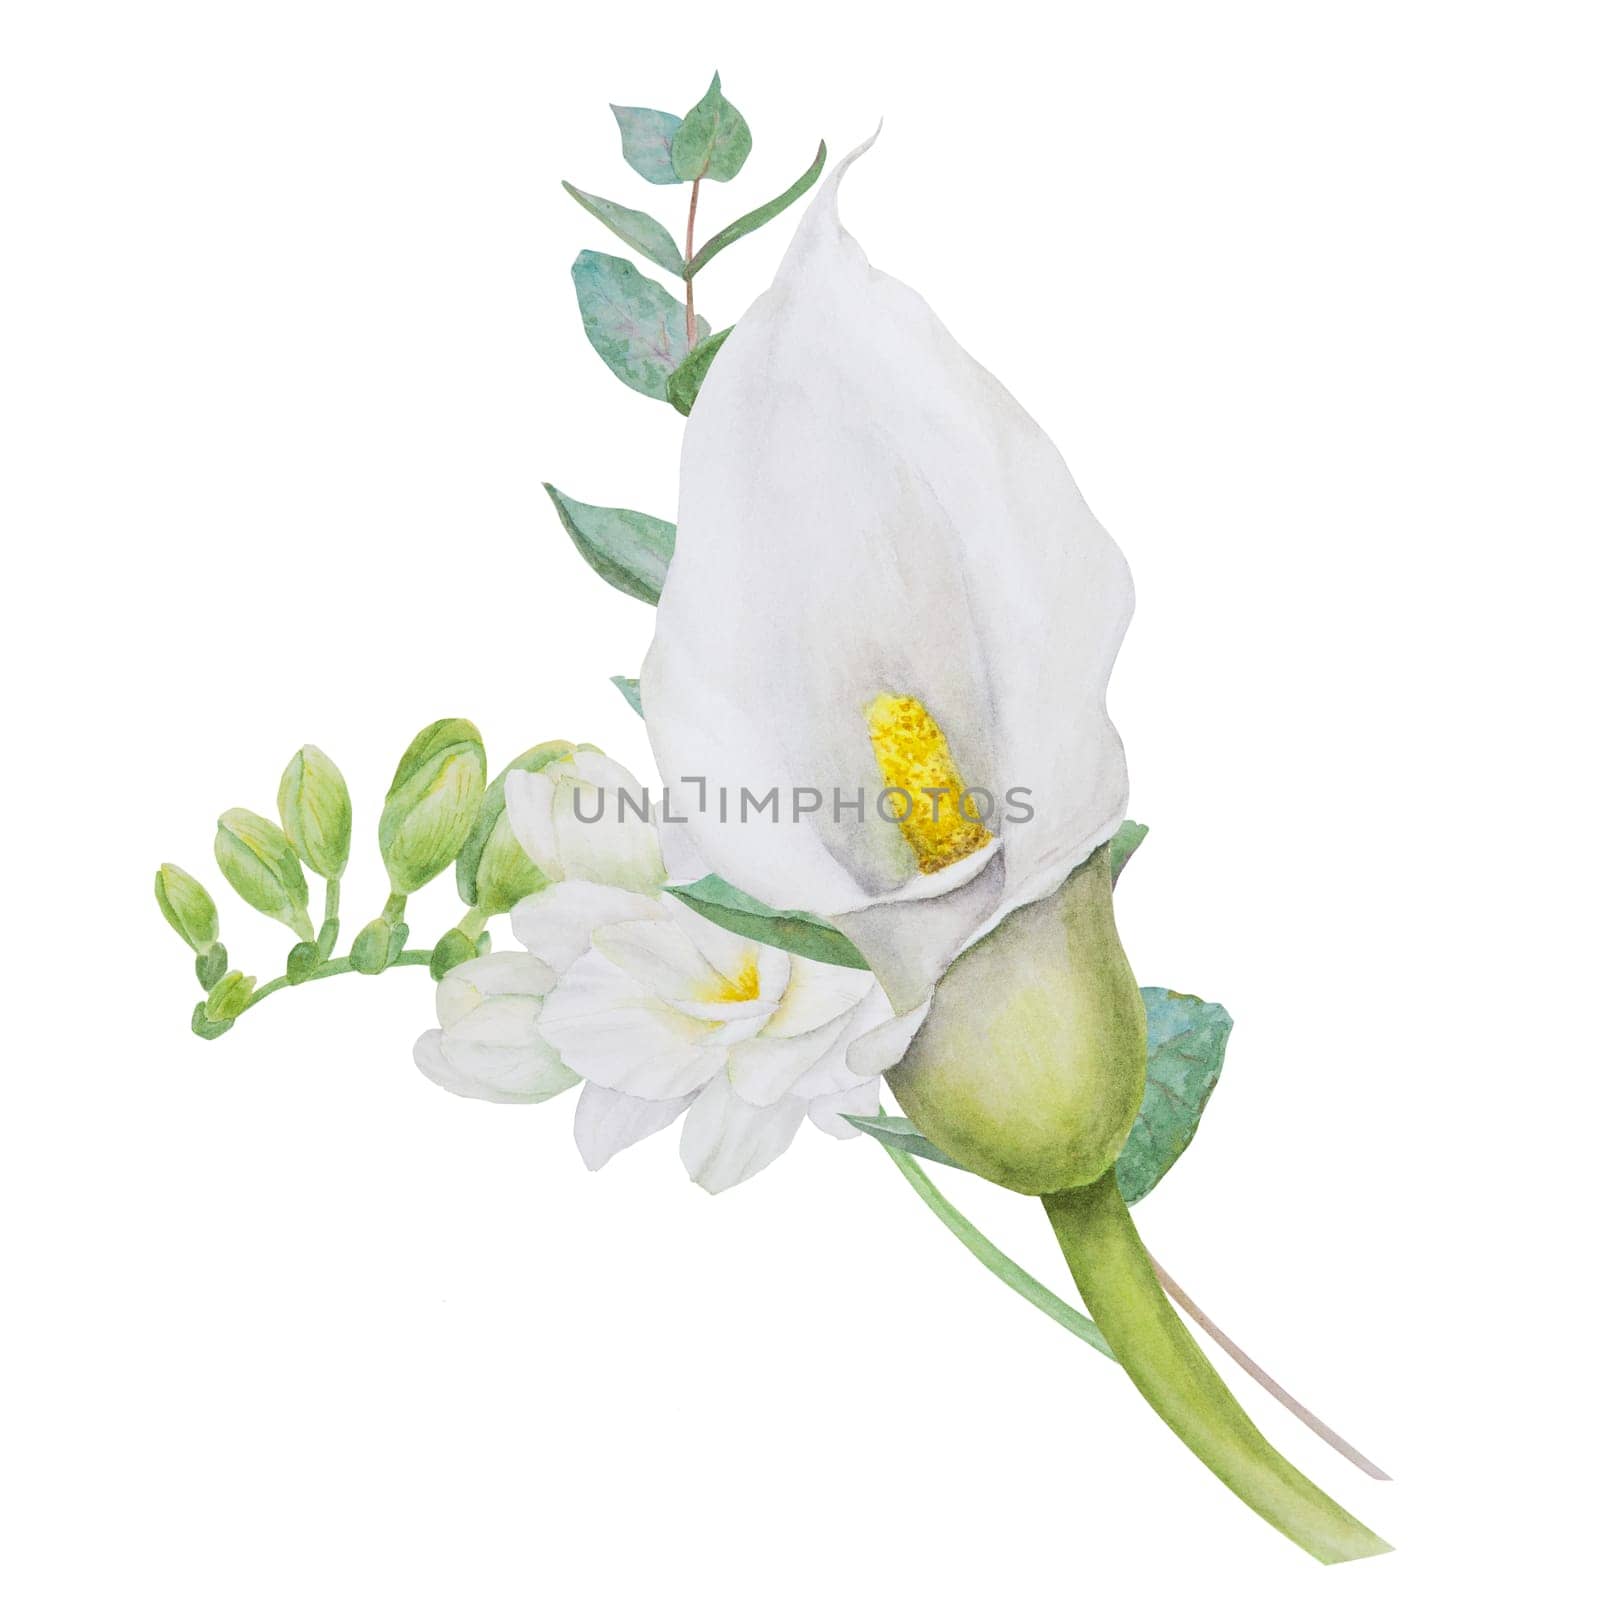 Watercolor clipart of white calla lily, freesia flowers and eucaliptus branch. Hand drawn floral illustration for wedding invitation, floristic, beauty salon. Isolated composition. tropical water arum by florainlove_art